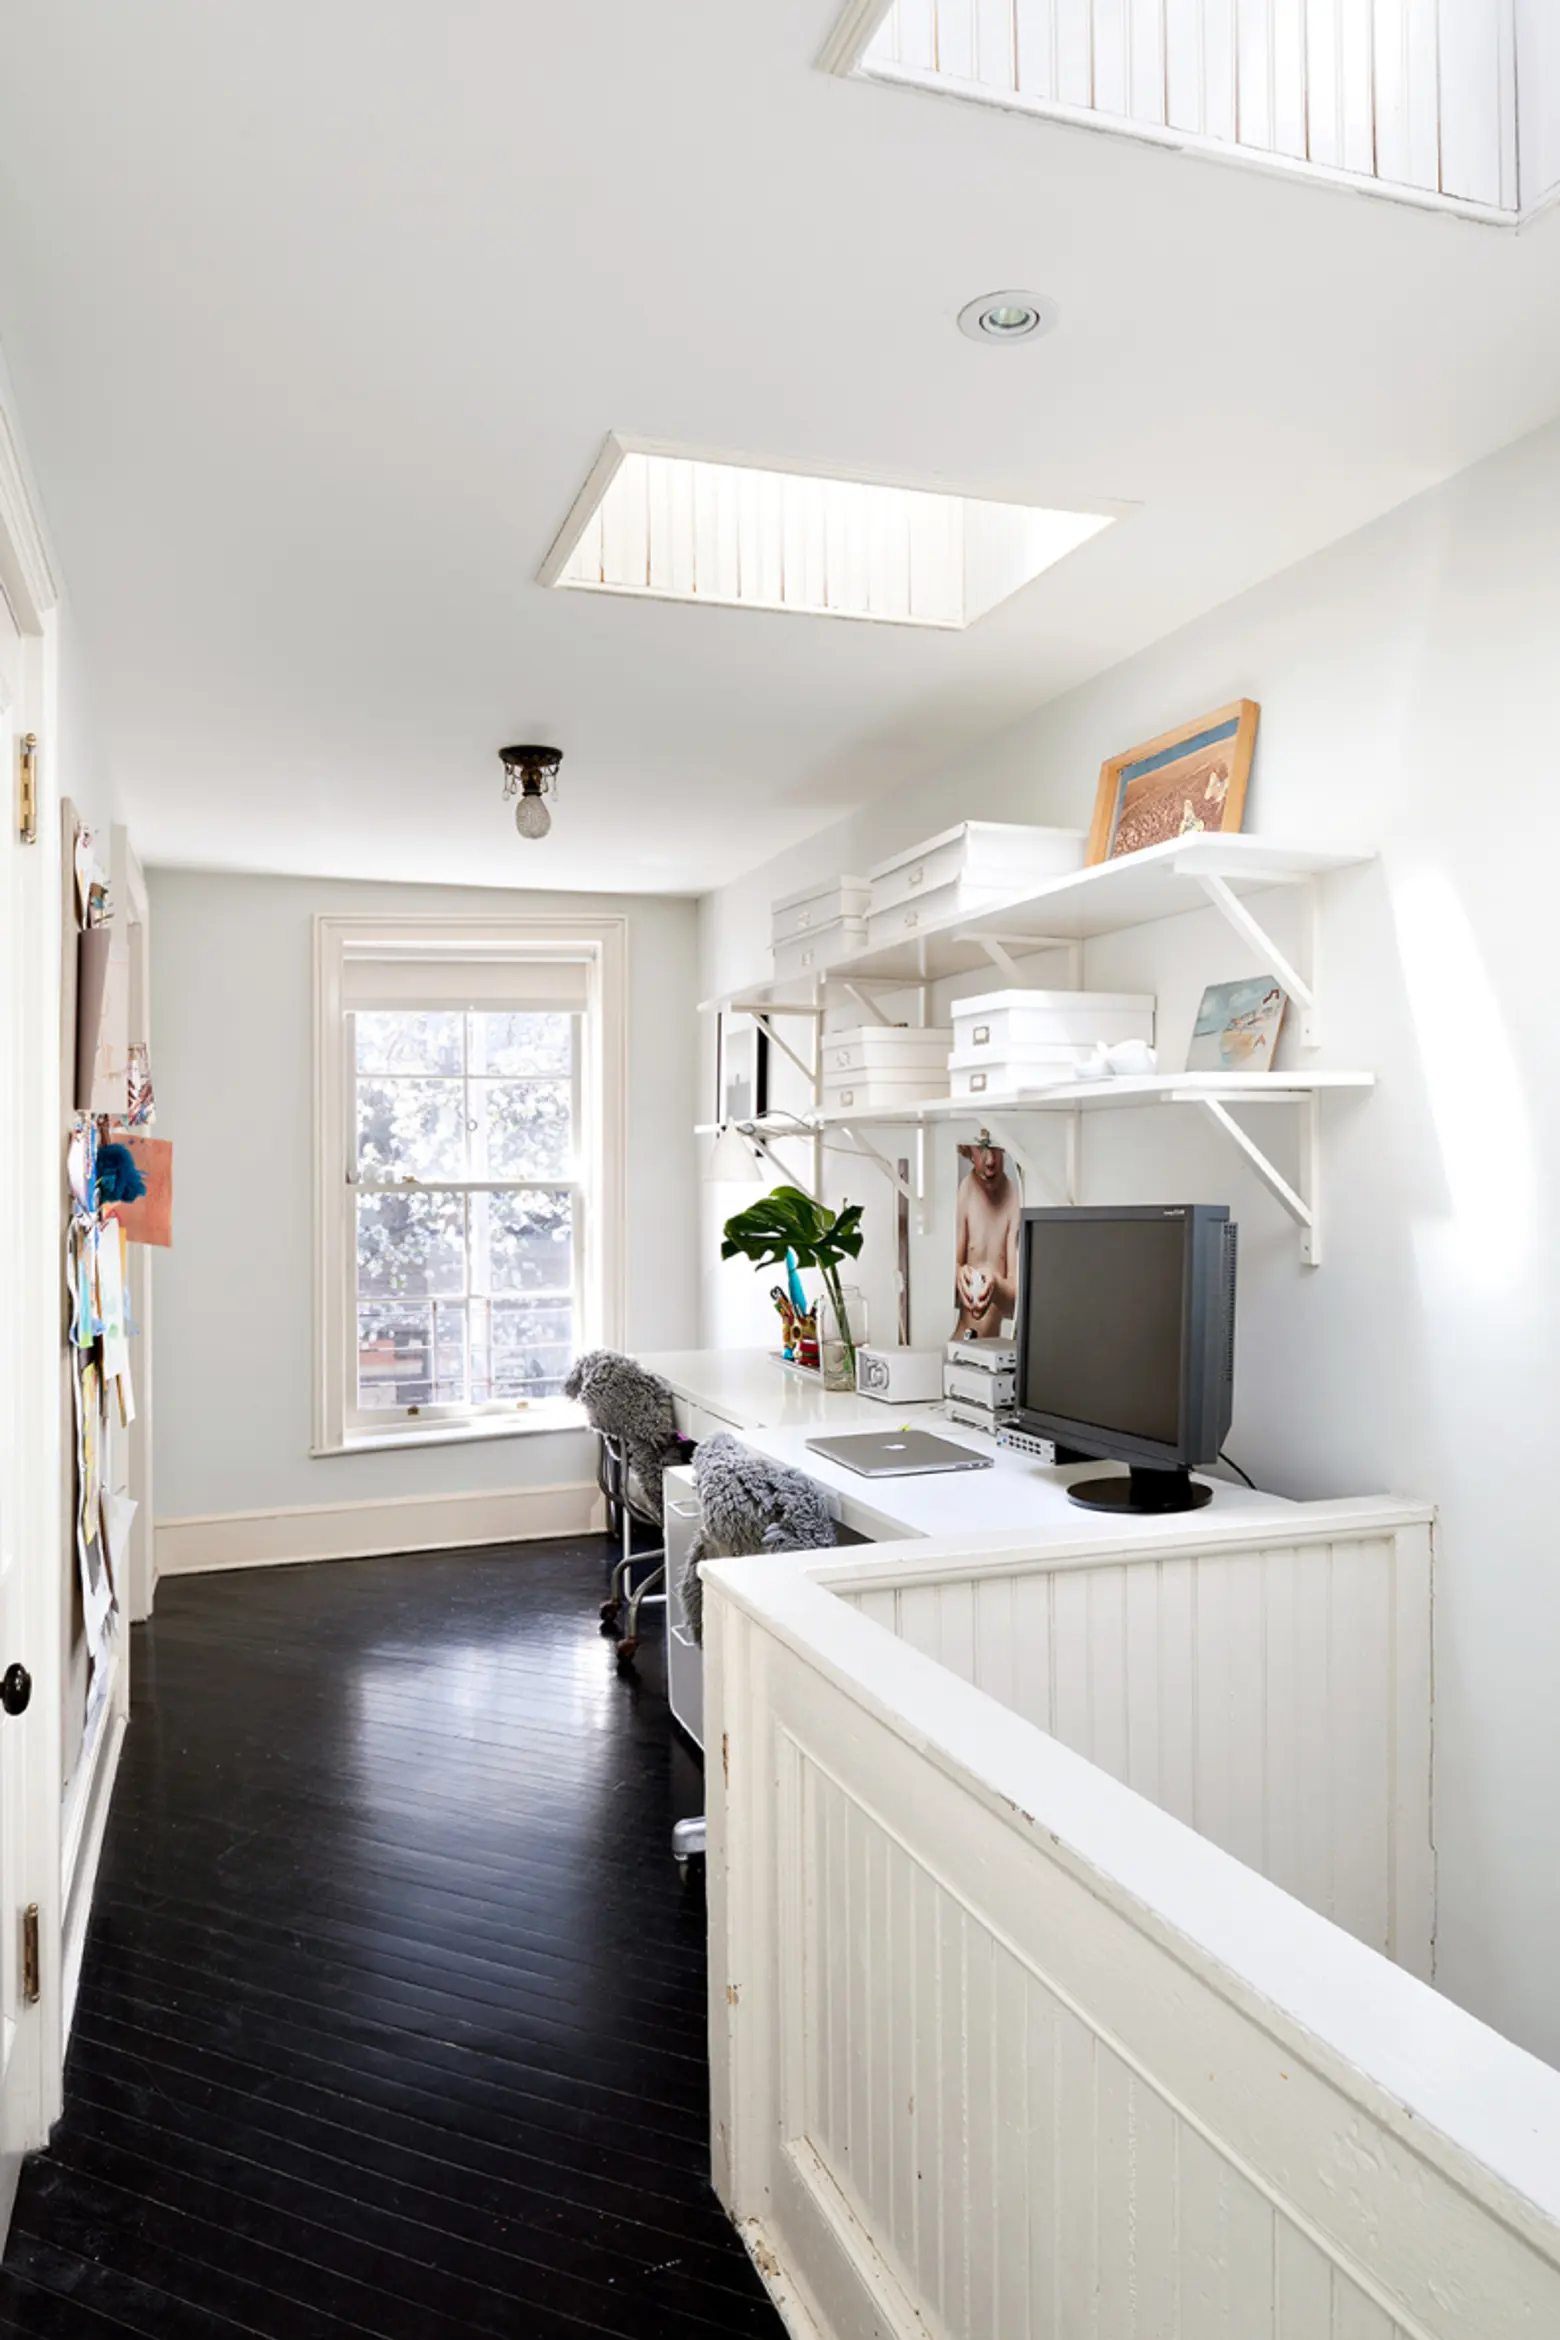 189 Huntington Street, Cool Listings, Cobble Hill, Townhouses, Brooklyn Townhouse for Sale, interiors